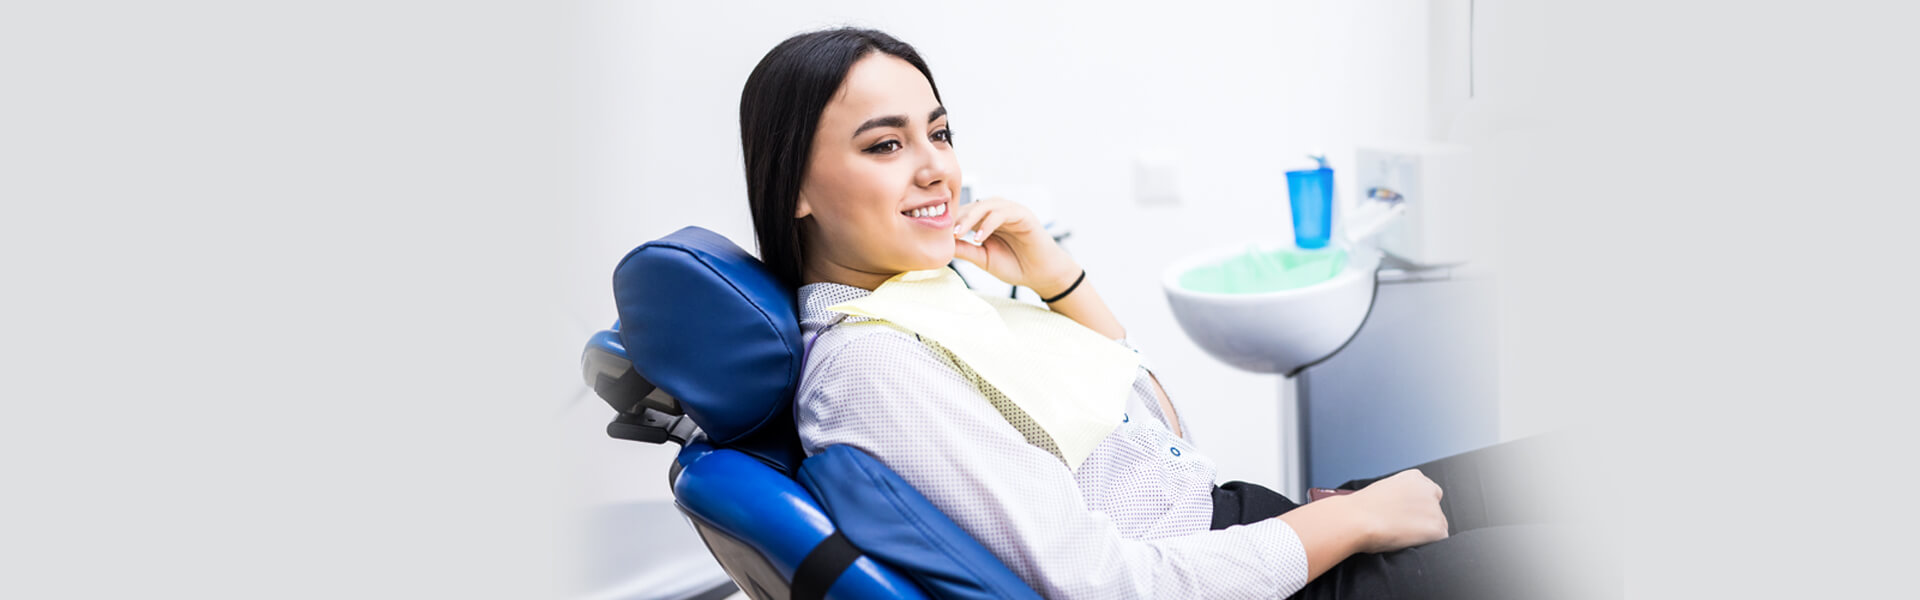 WHAT ARE THE COMPONENTS OF PREVENTIVE DENTISTRY?